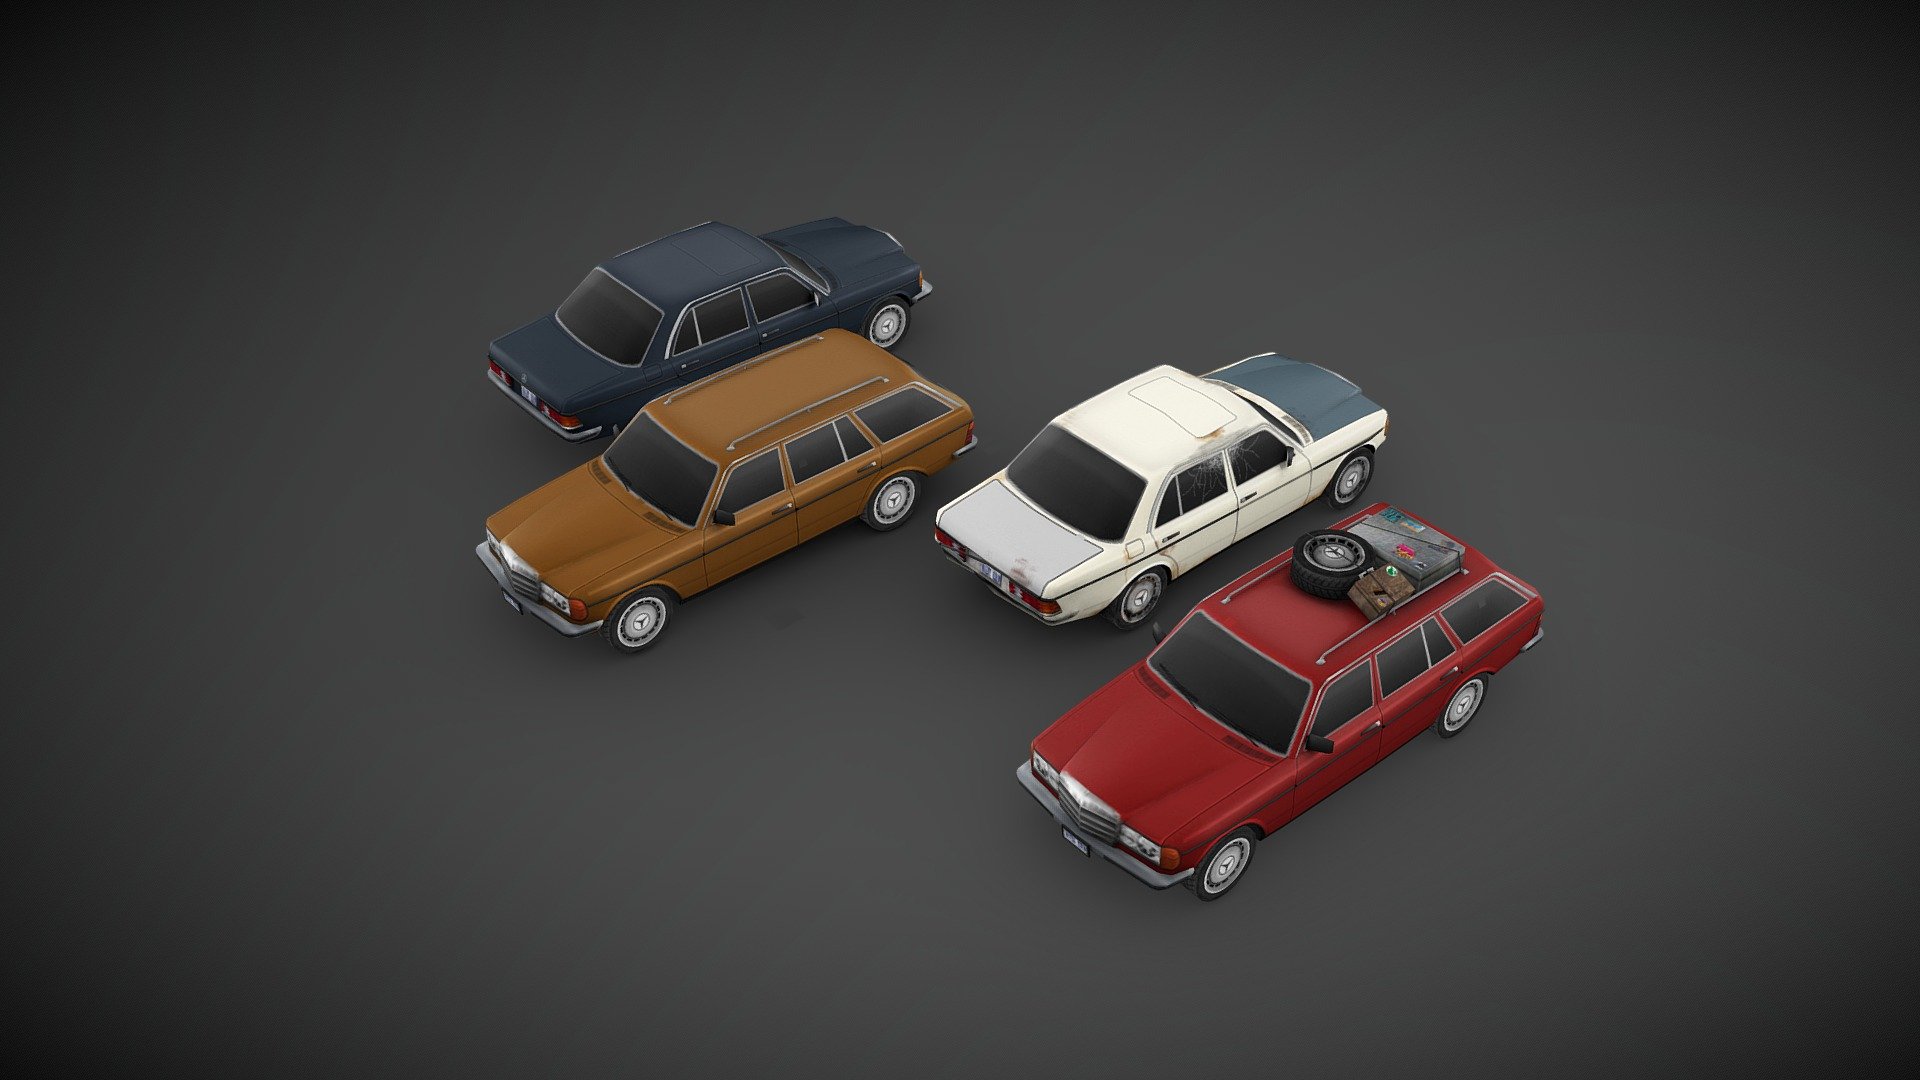 Another showcase of a 1985 Mercedes Benz W123 I’ve made for project ZOMBOID, low poly but with a high detail texture, optimized for game engine. This version is not a 100% true to the original since there are some compromises I’ve had to make to present it here.

You can find the actual version in project ZOMBOID STEAM Workshop 3d model